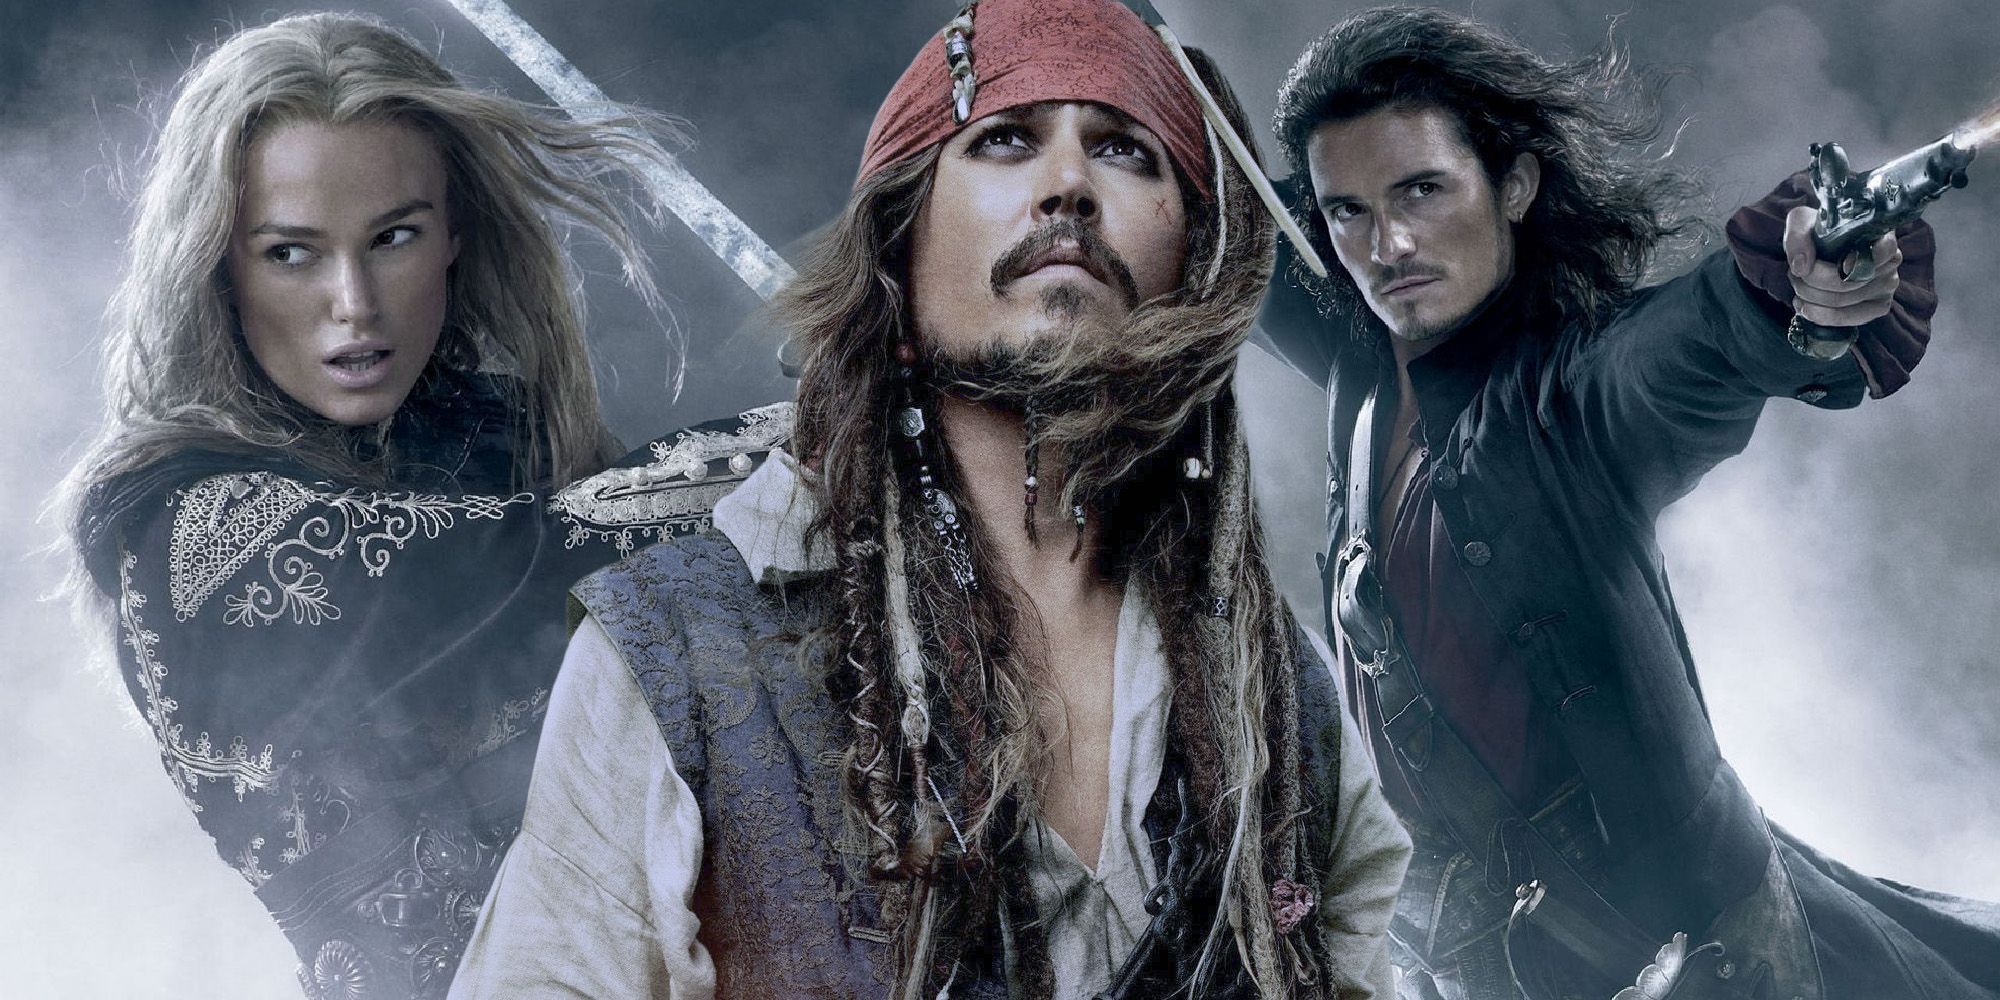 Pirates of the Caribbean The Secret Meaning Behind The Heroes' Names